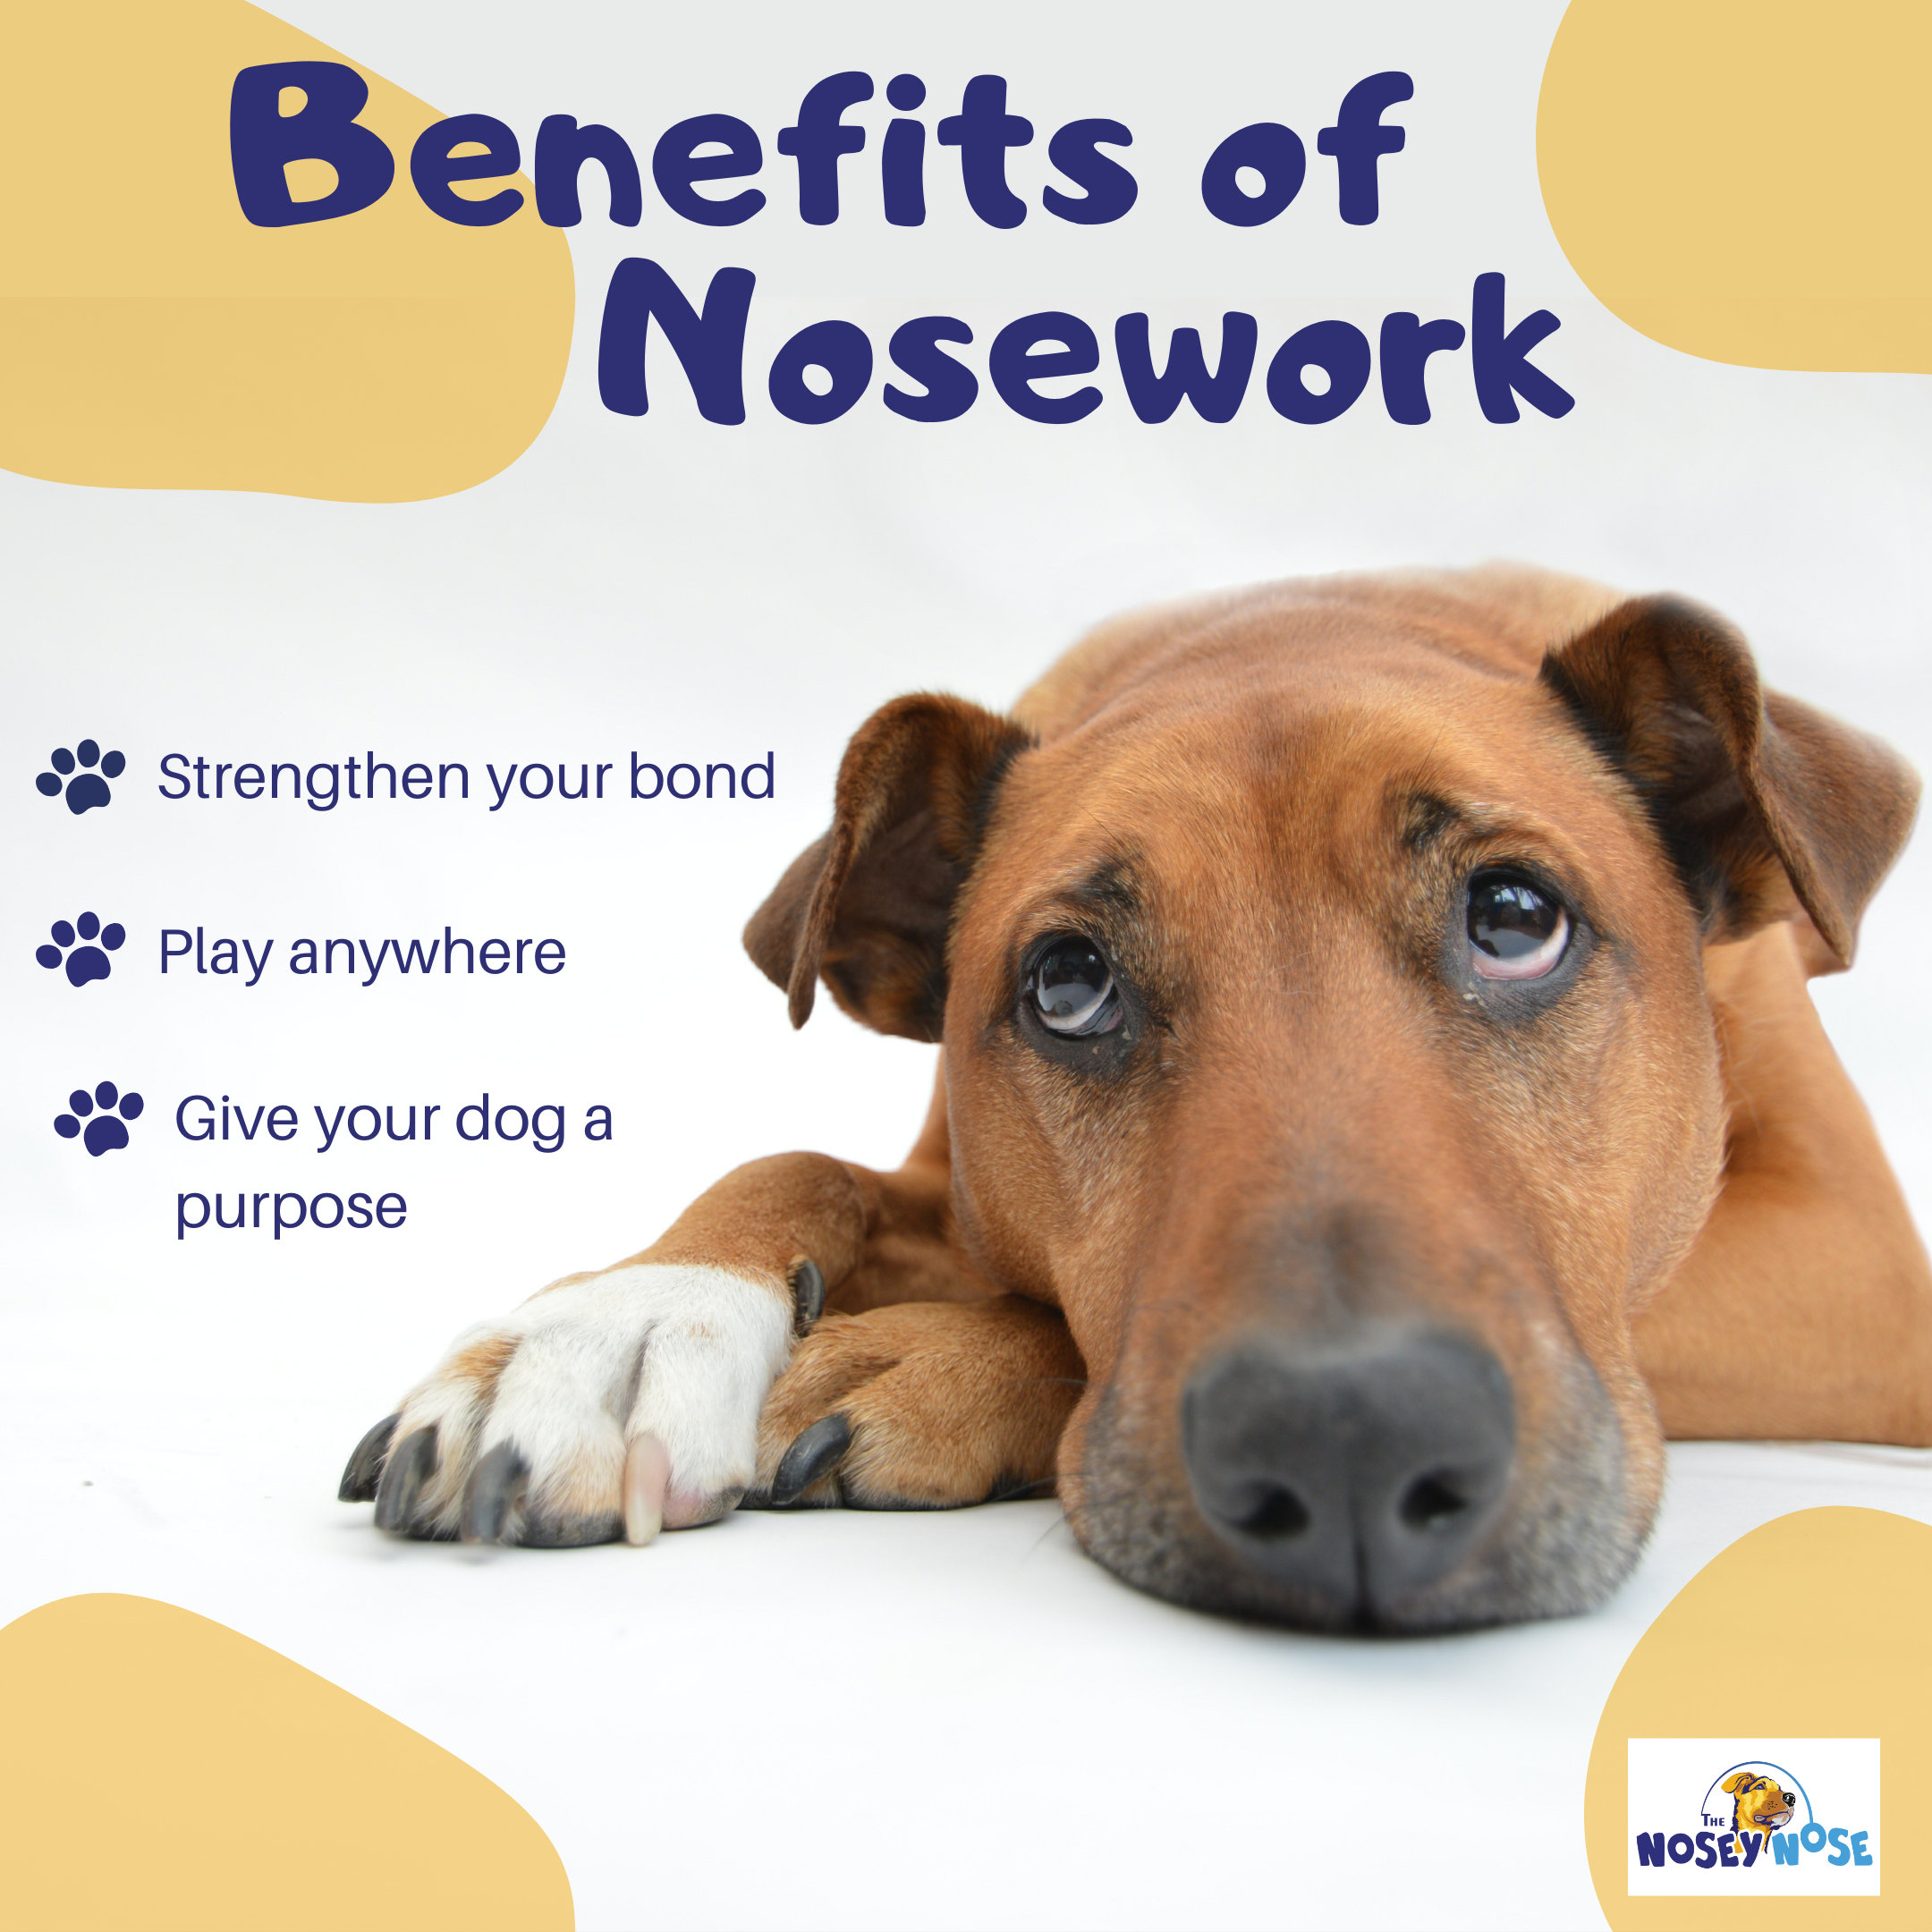 Nose work is an easy way to get your dogs mind thinking and